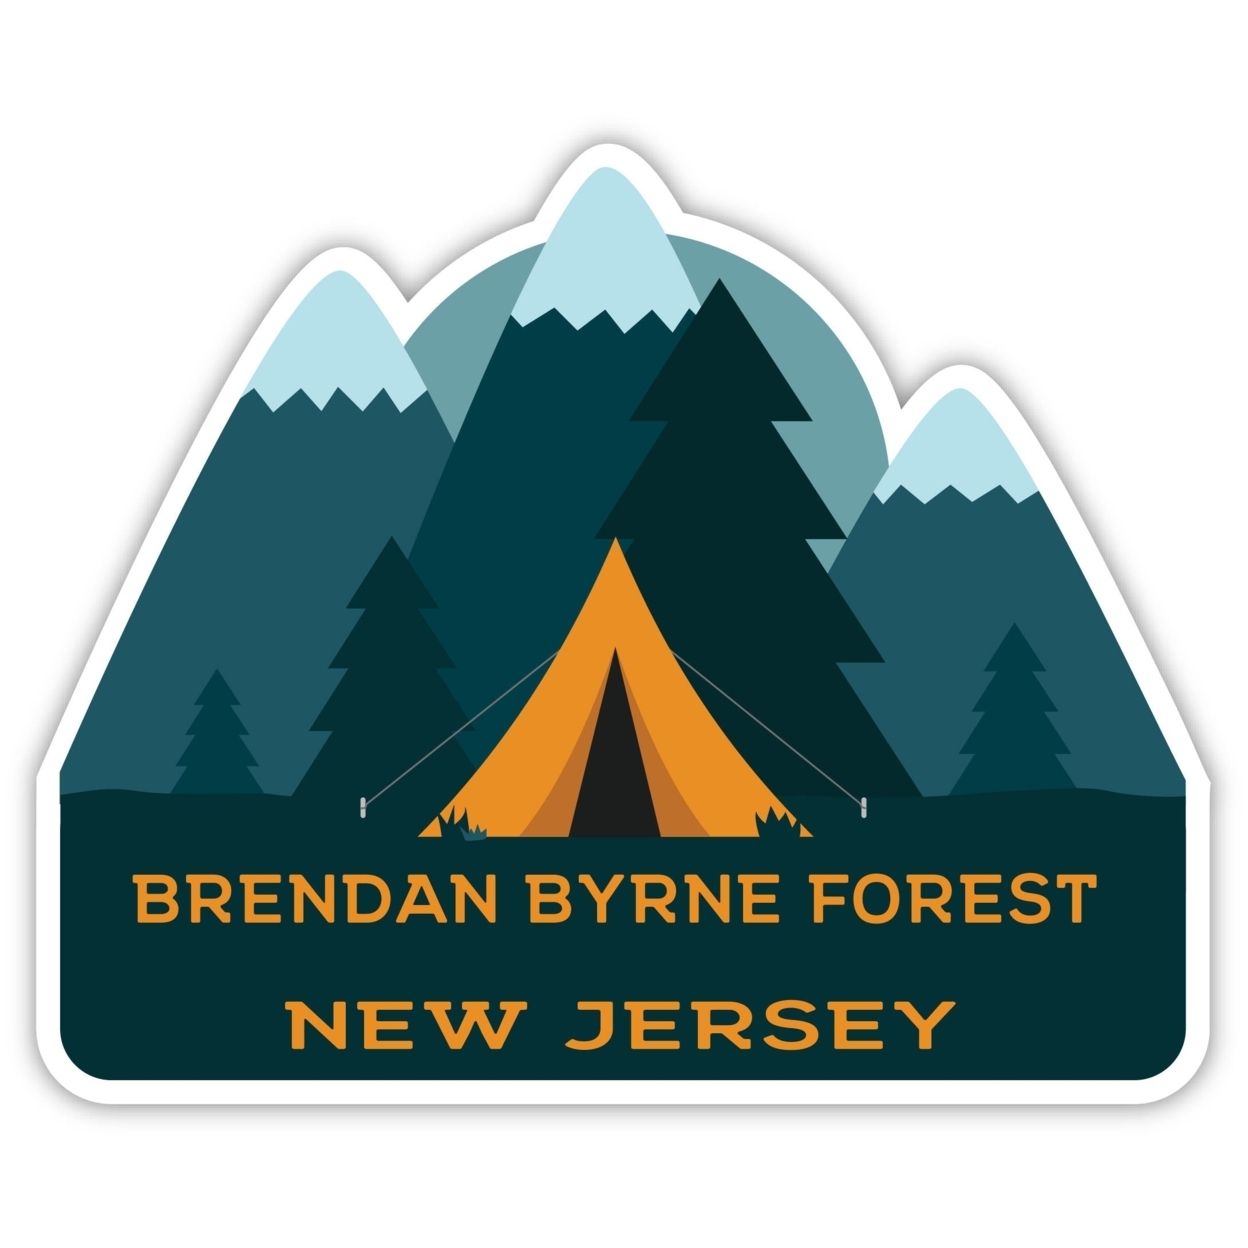 Brendan Byrne Forest New Jersey Souvenir Decorative Stickers (Choose Theme And Size) - 4-Pack, 2-Inch, Tent